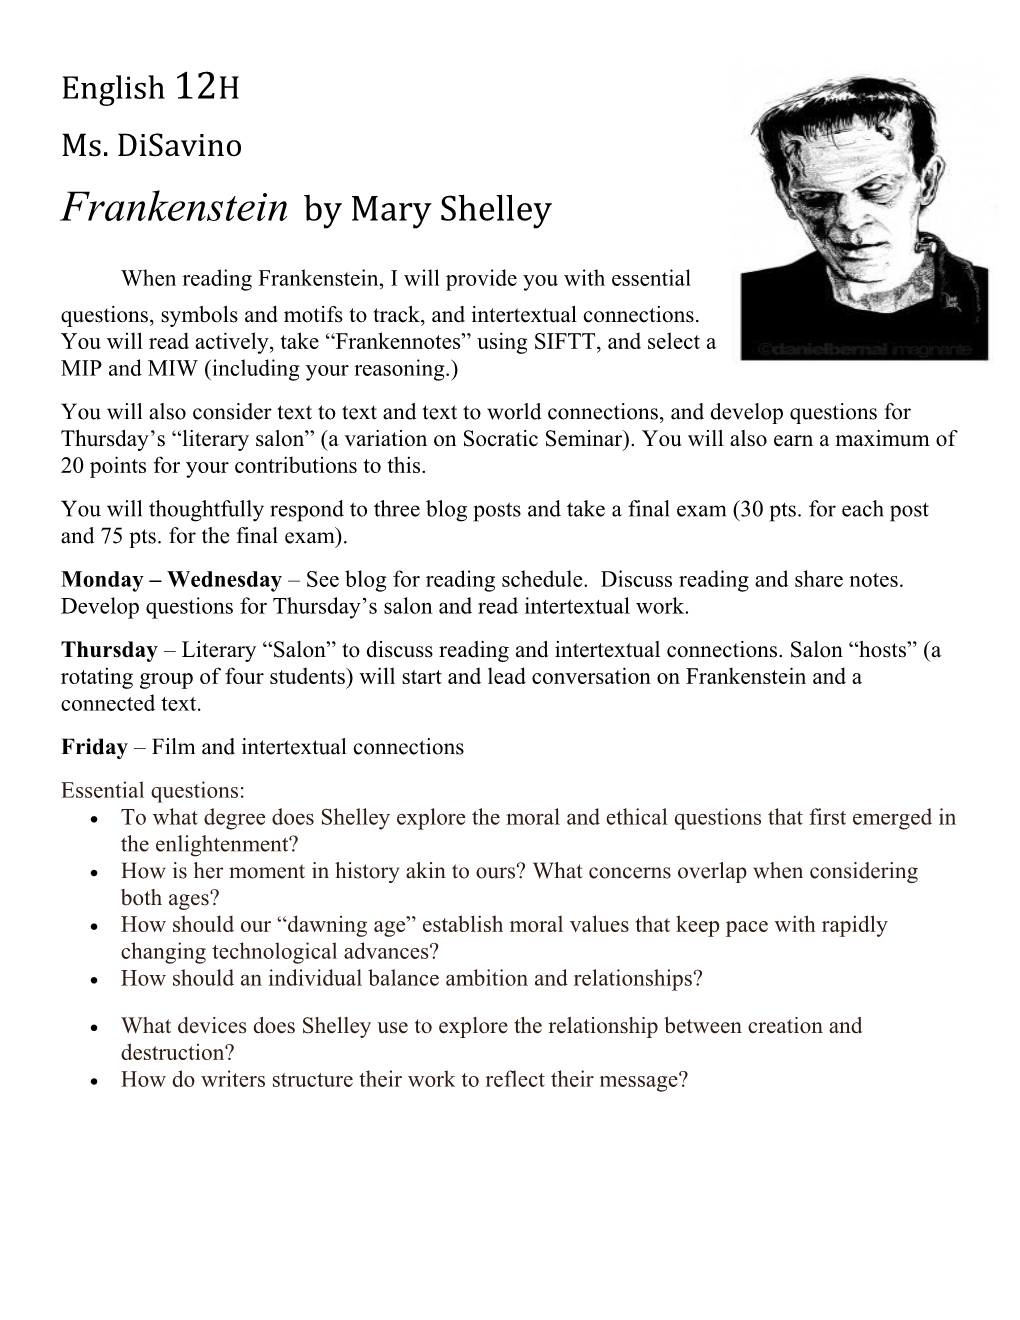 Frankensteinby Mary Shelley